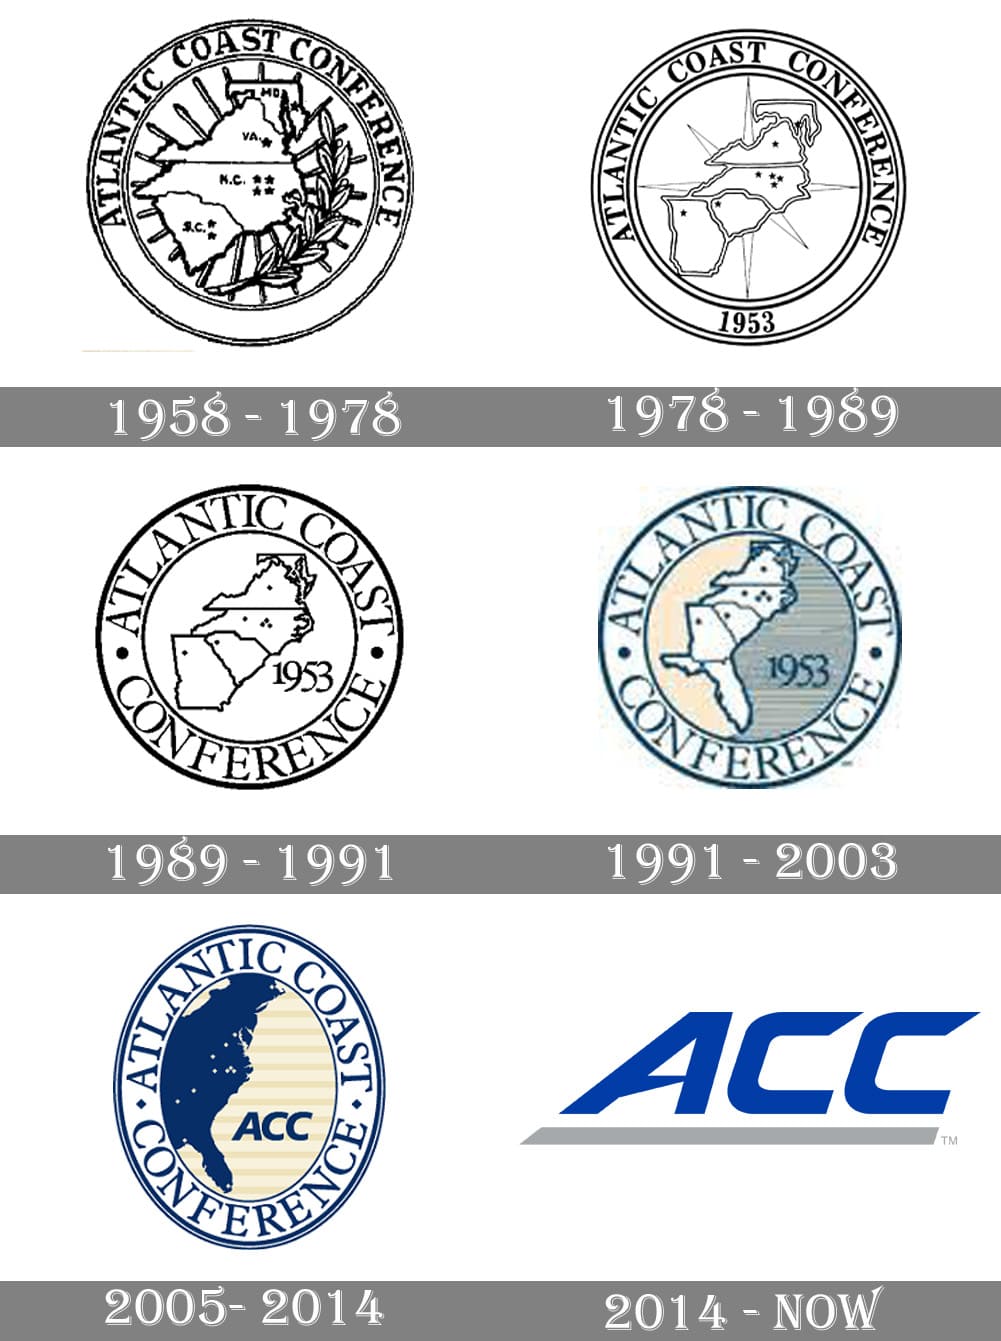 ACC logo and symbol, meaning, history, PNG, brand